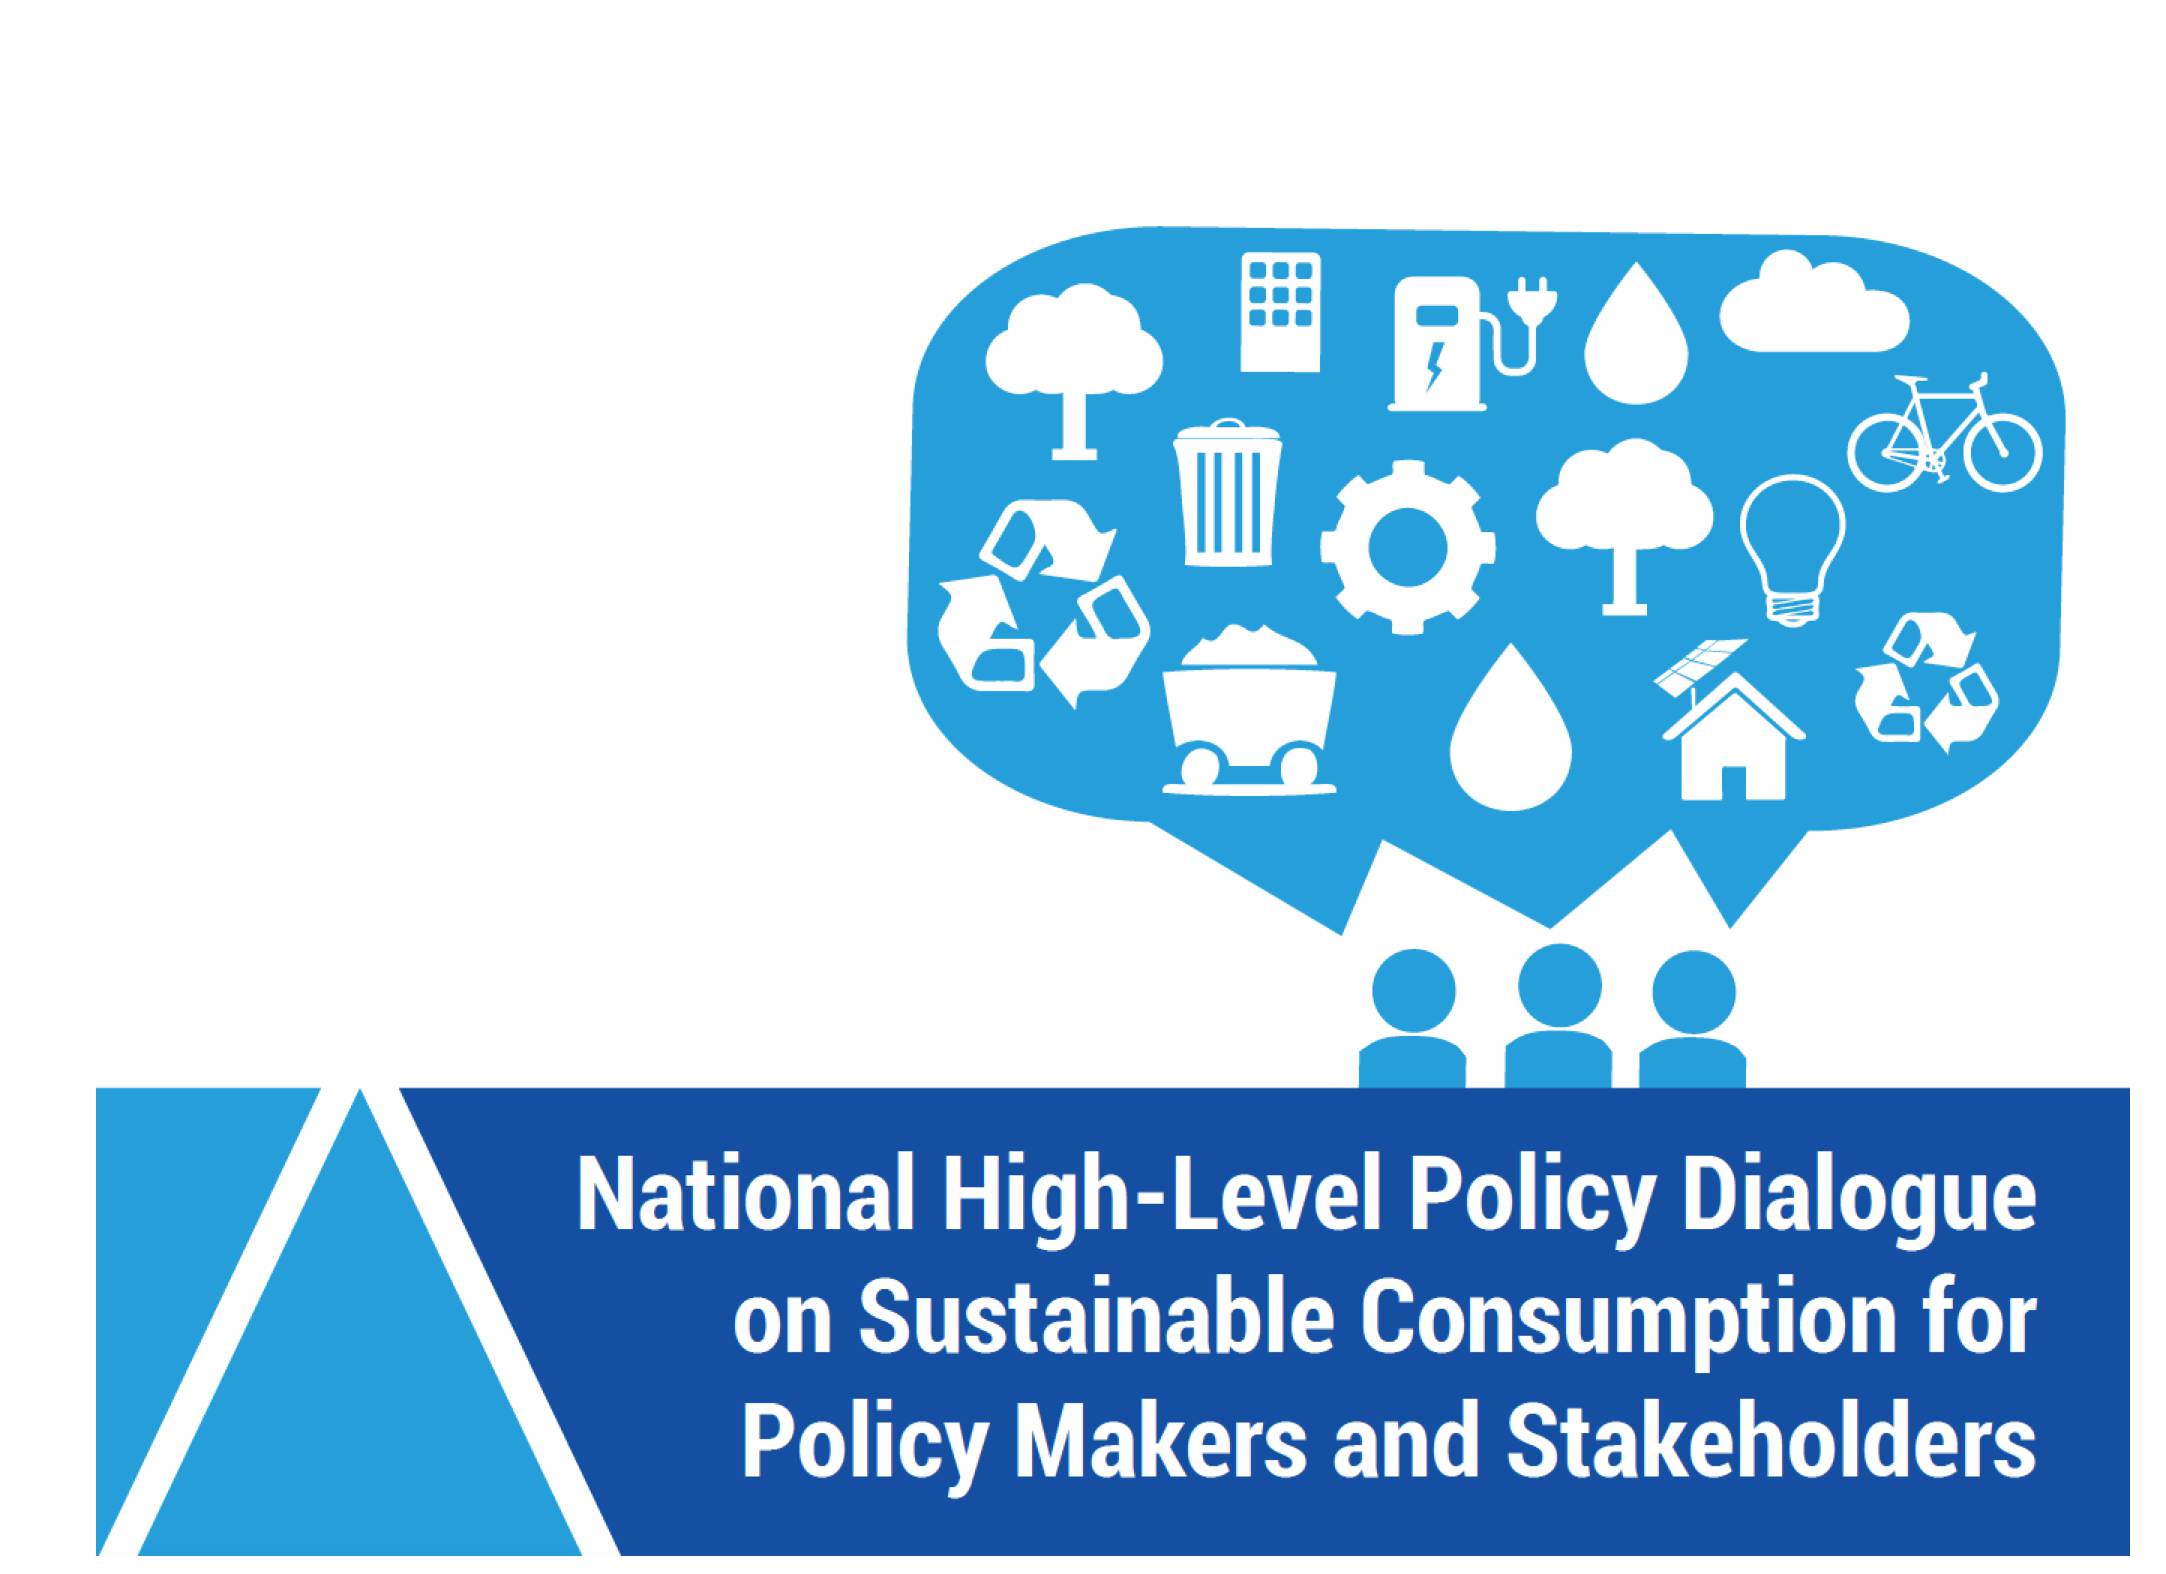 National High Level Policy Dialogue on Sustainable Consumption for Policy Makers and Stakeholders